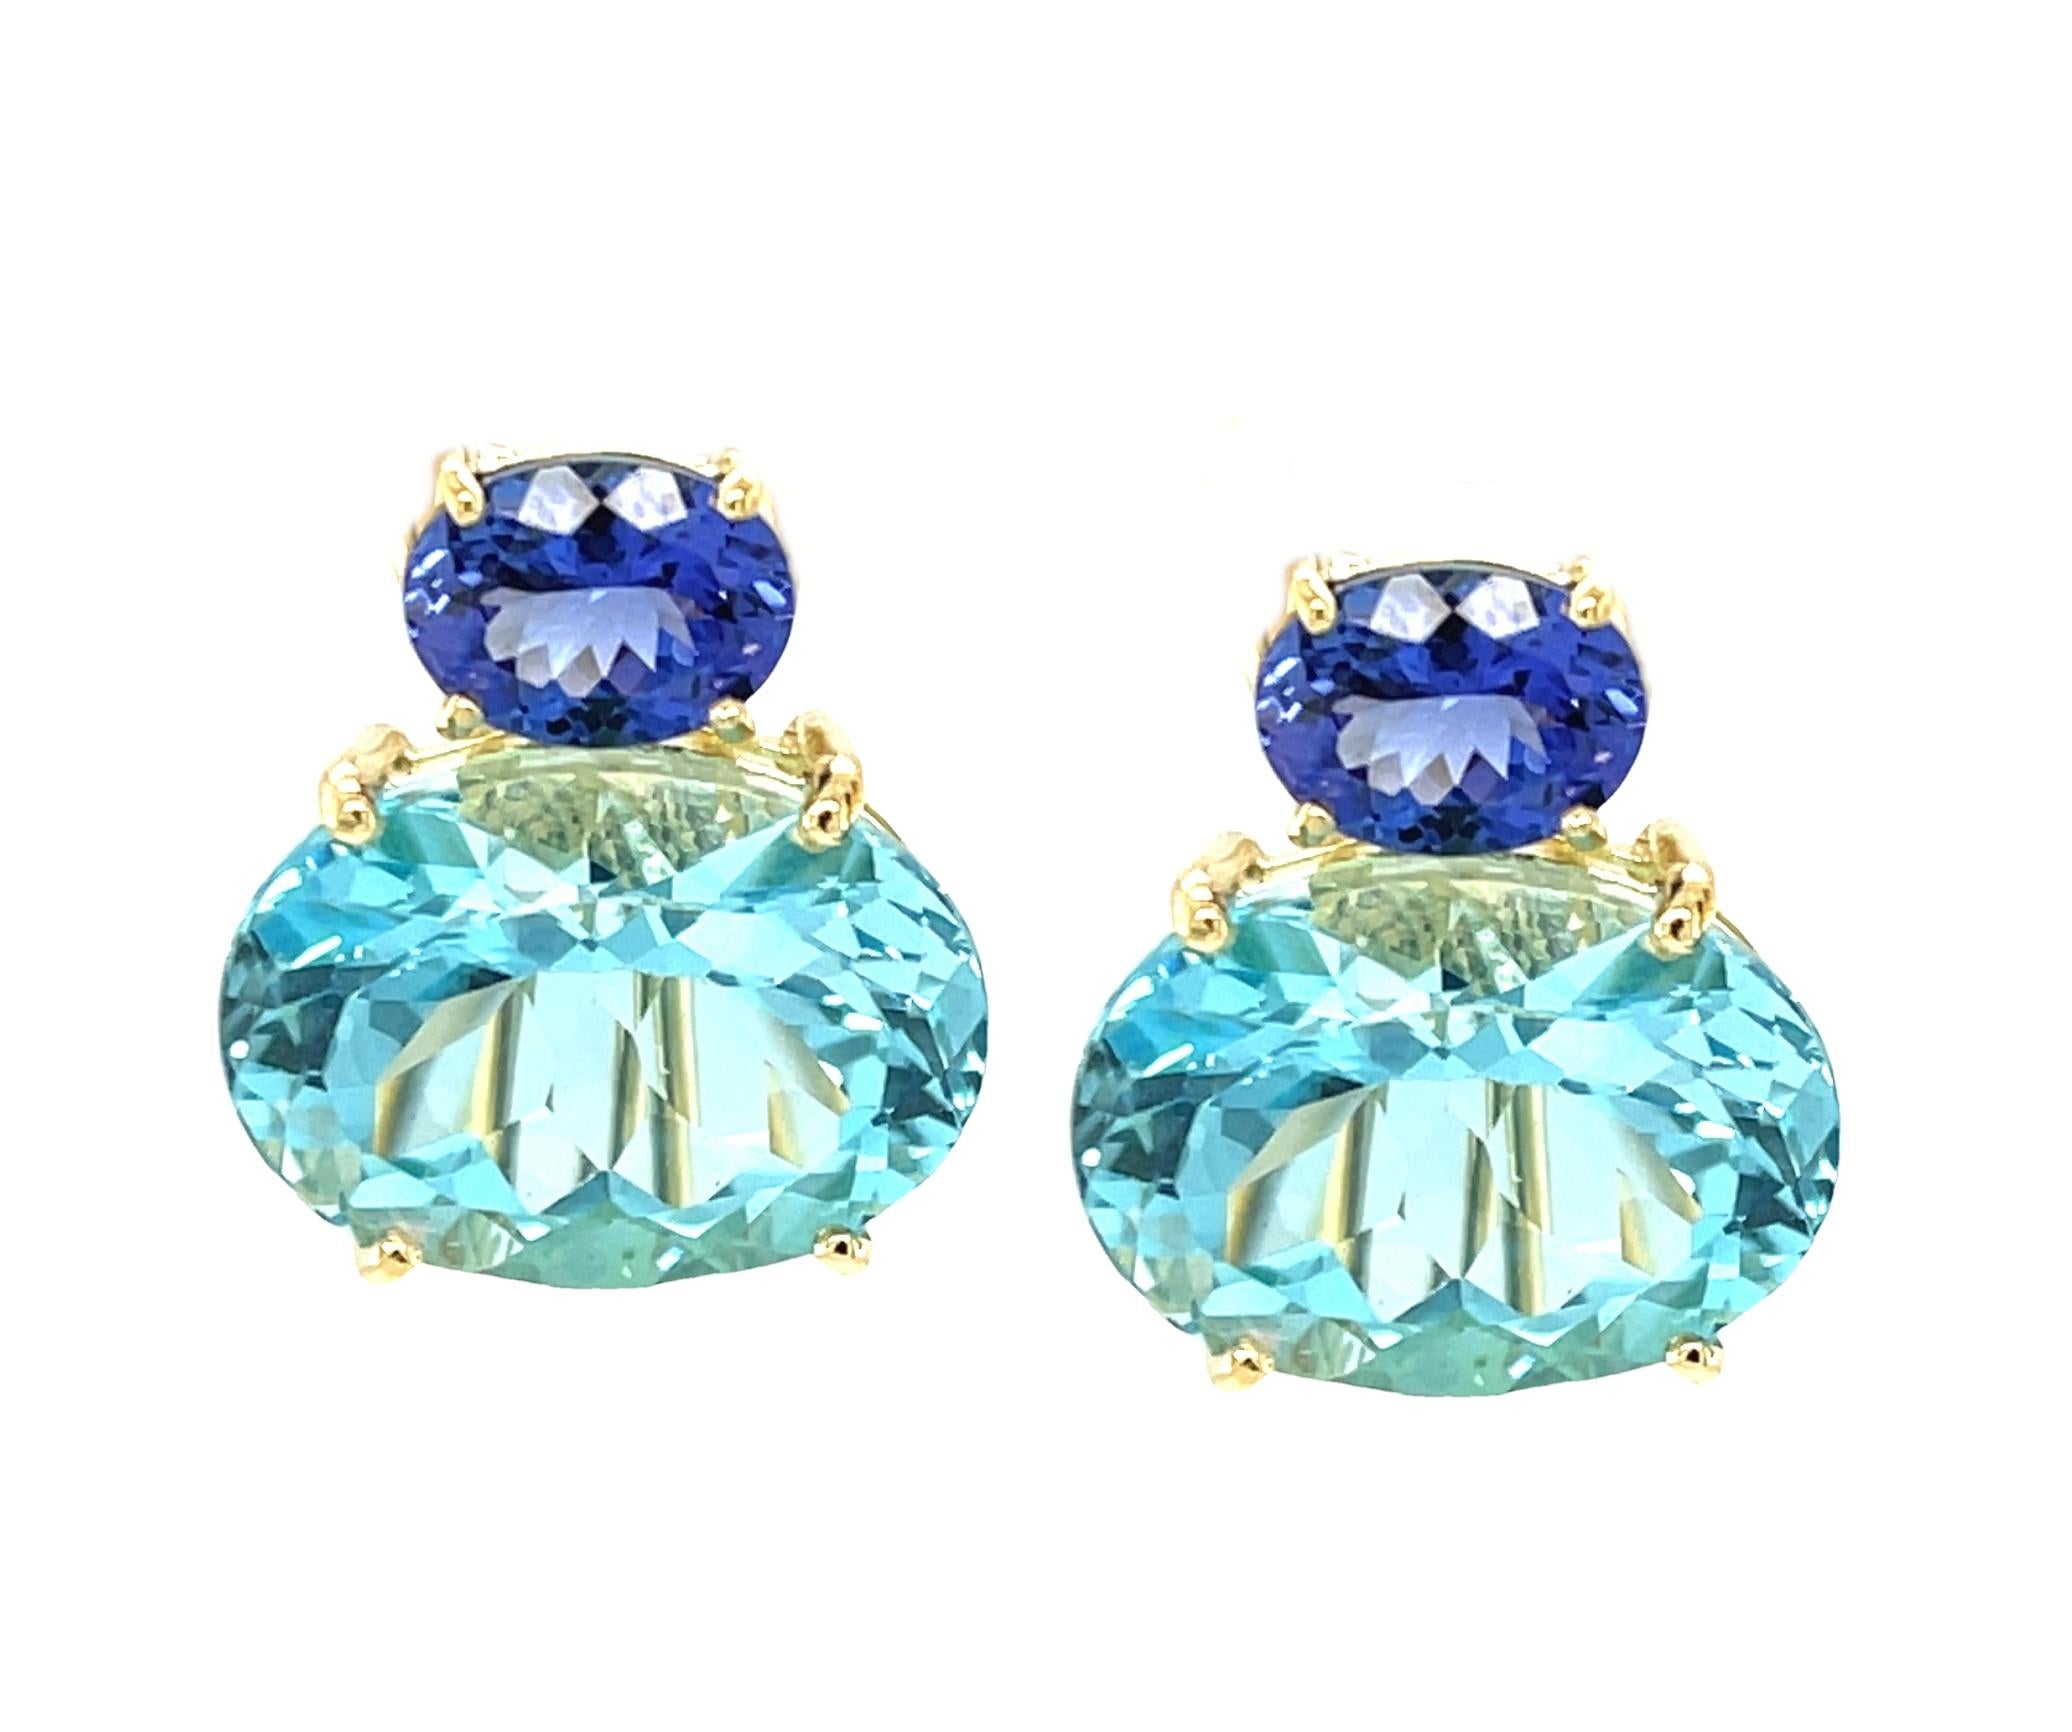 These impressive earrings feature a beautifully matched pair of Swiss blue topazes that have a combined weight of over 23 carats! The large sparkling ovals are set horizontally with gorgeous African tanzanites in an original color block design that